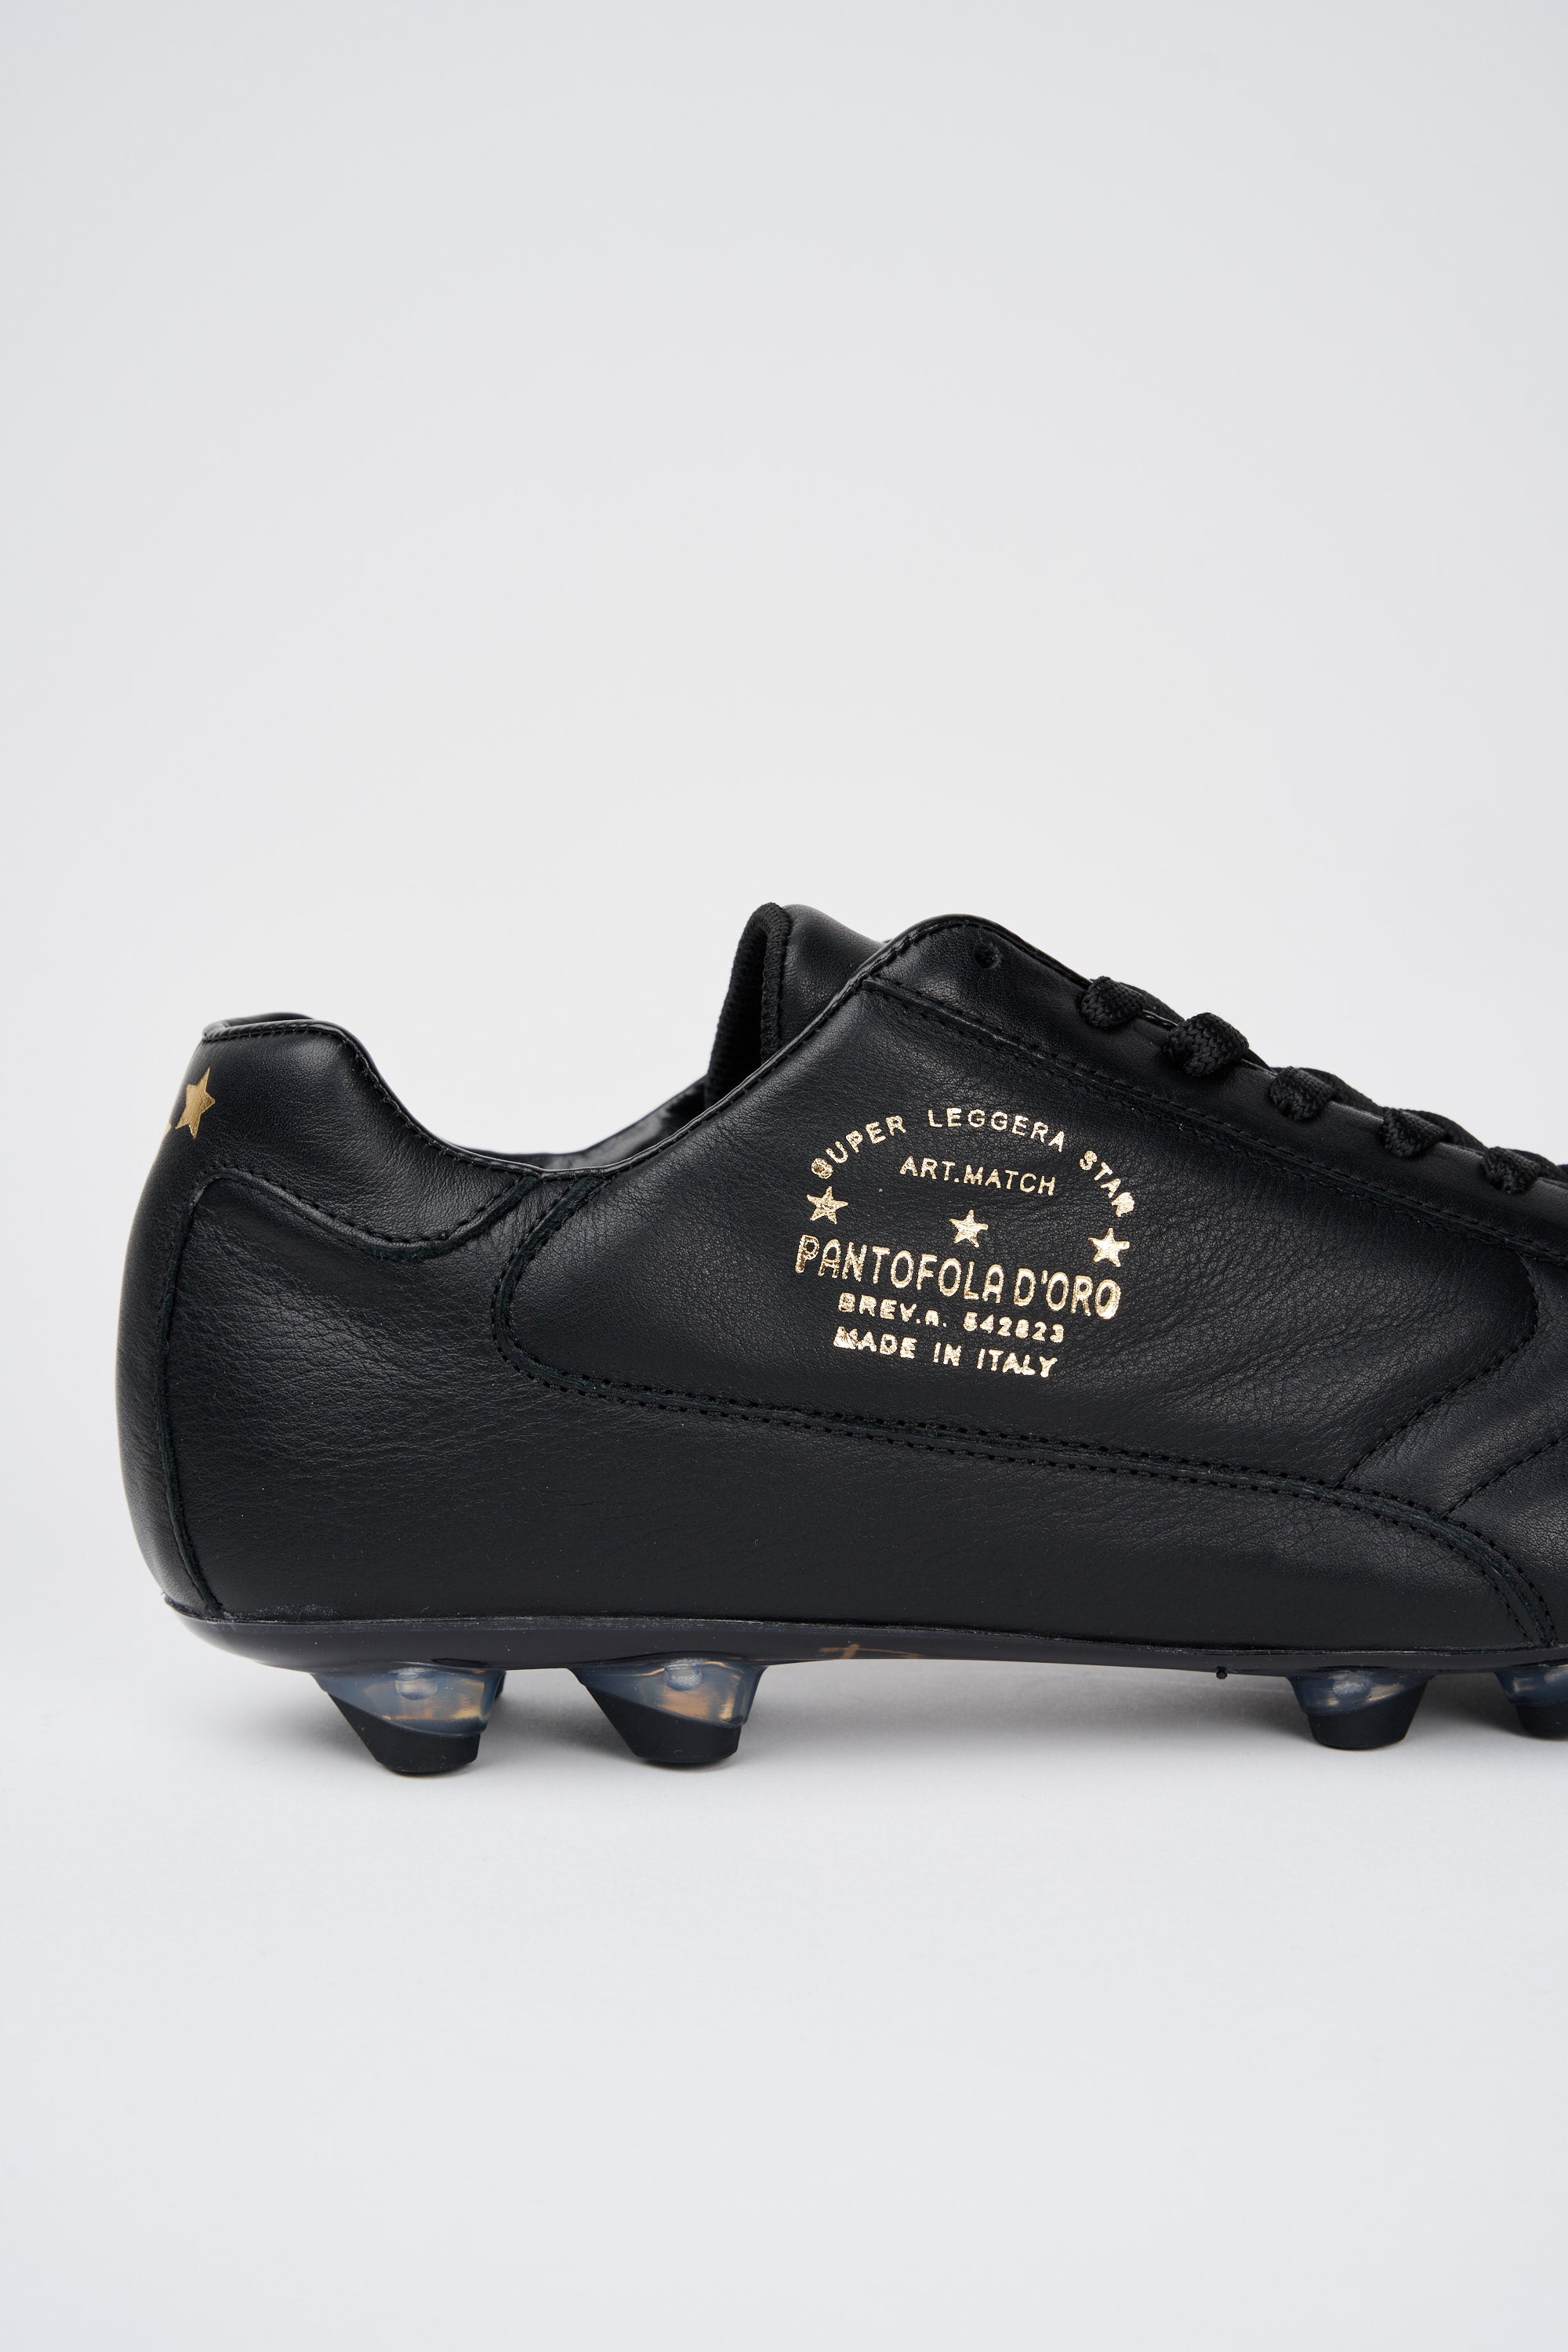 Pantofola d'Oro Classic Leather Football Boot